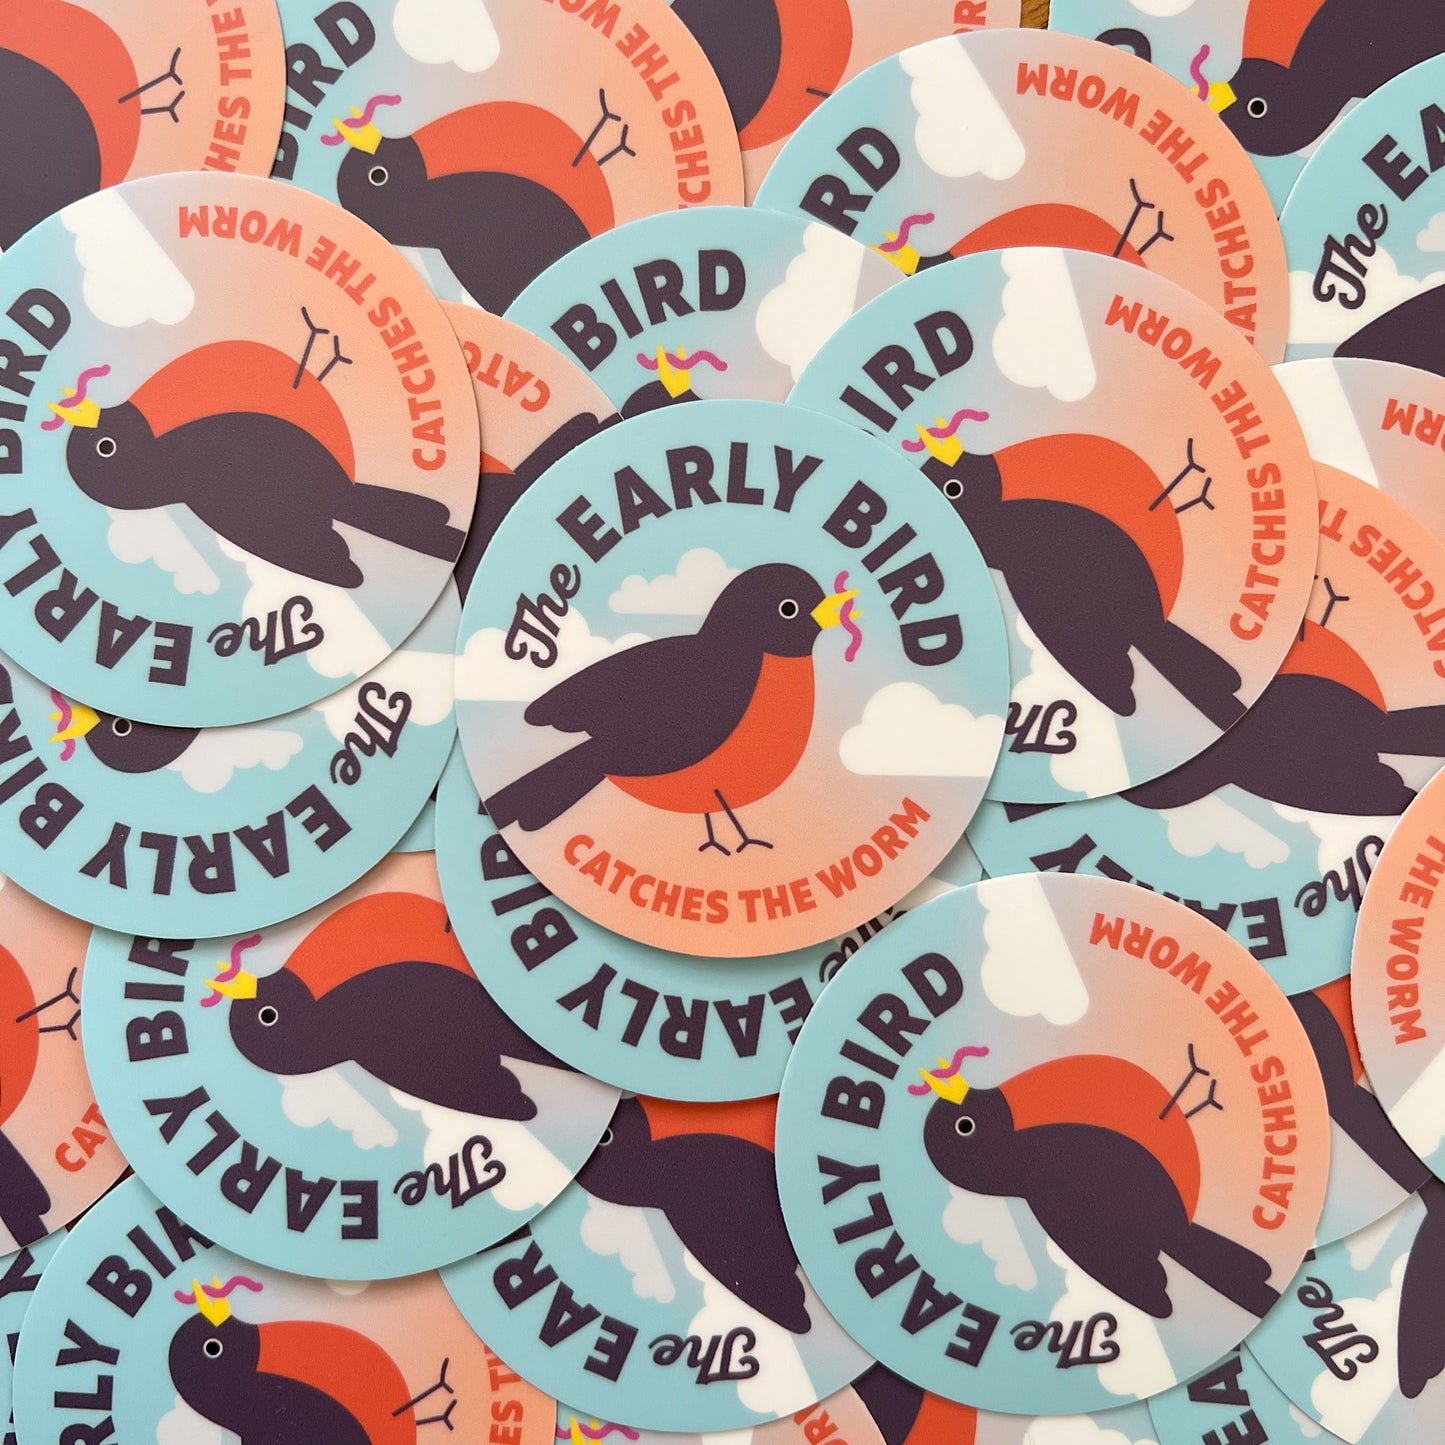 Robin: The Early Bird Gets the Worm: 2.5 inch vinyl sticker